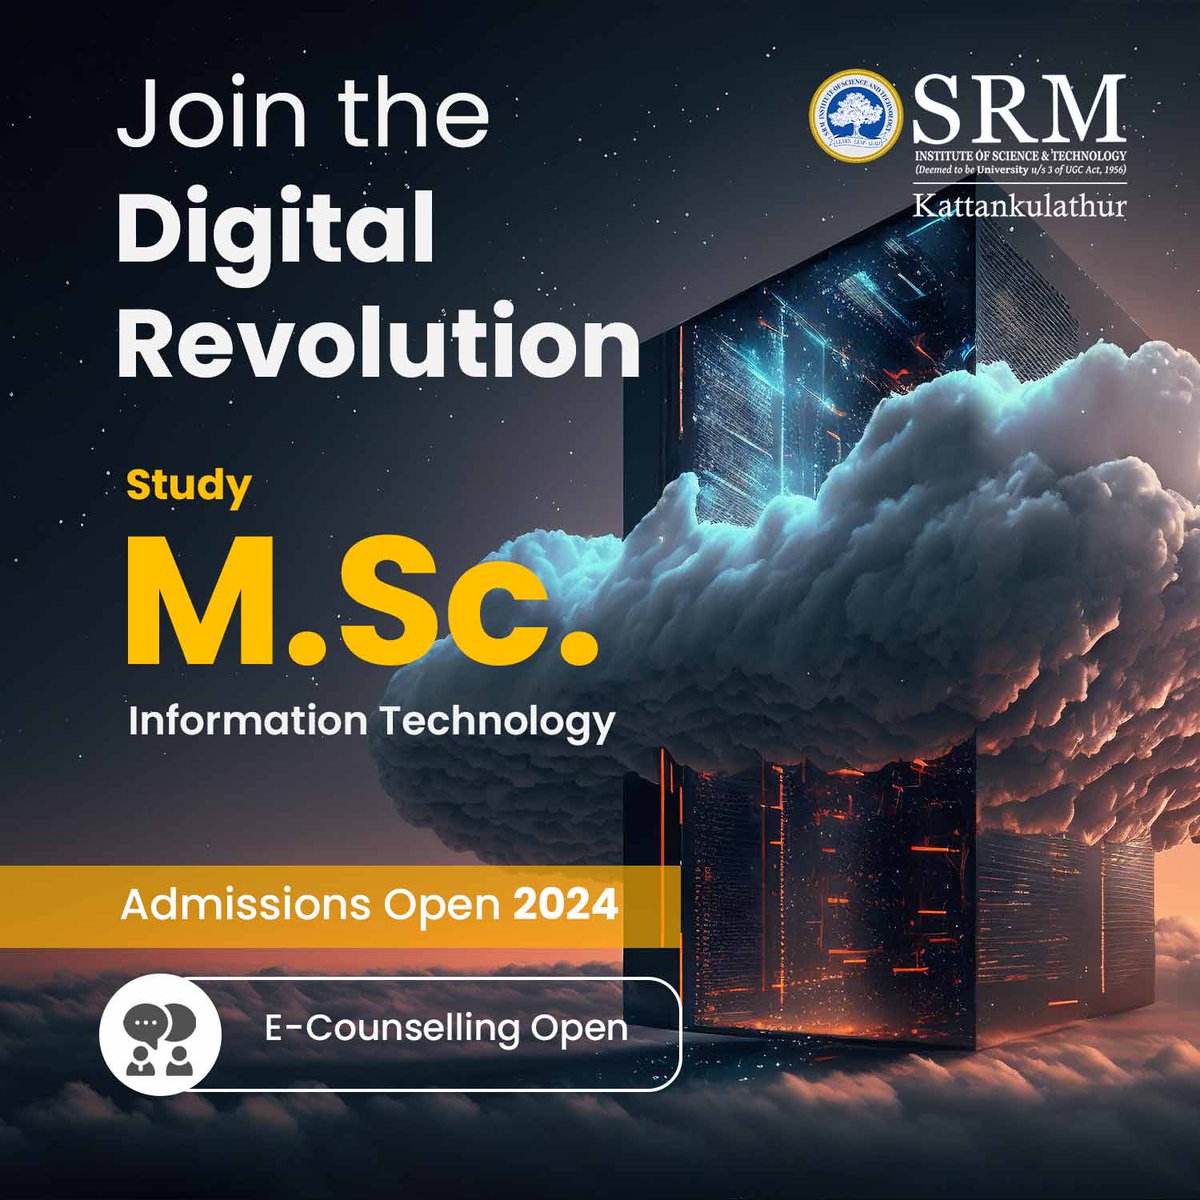 Explore the forefront of innovation in fields like cyber security, data analytics, software development & more by pursuing a master's degree at #SRMIST.

Applications are NOW open!
Visit➡️ bit.ly/4dmk61w for more details.

#srmuniversity #srmkattankulathur #admissions